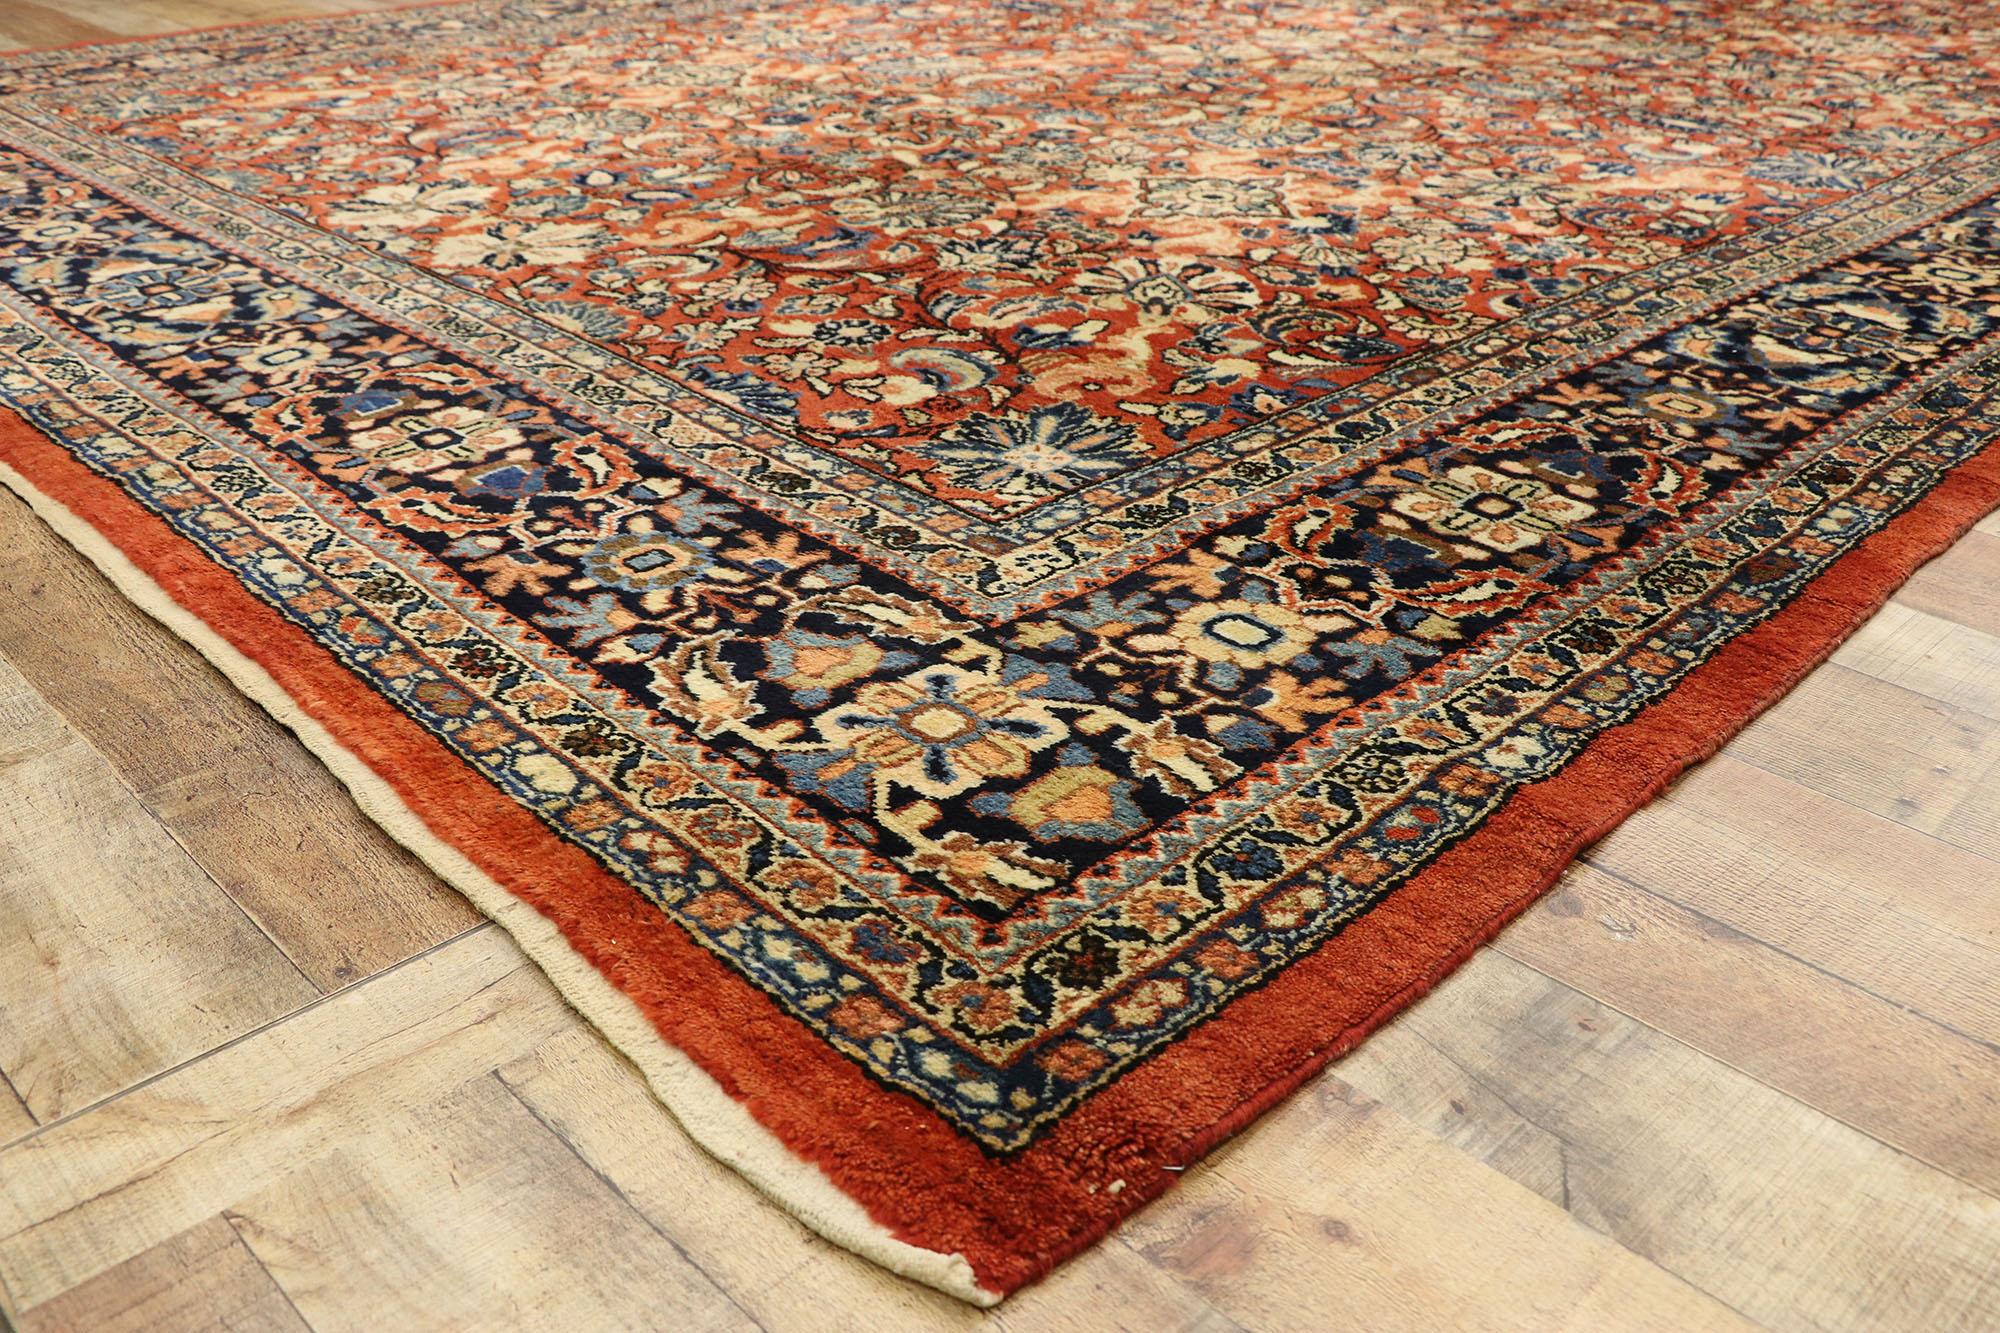 Antique Persian Mahal Rug with Traditional Federal and American Colonial Style 1